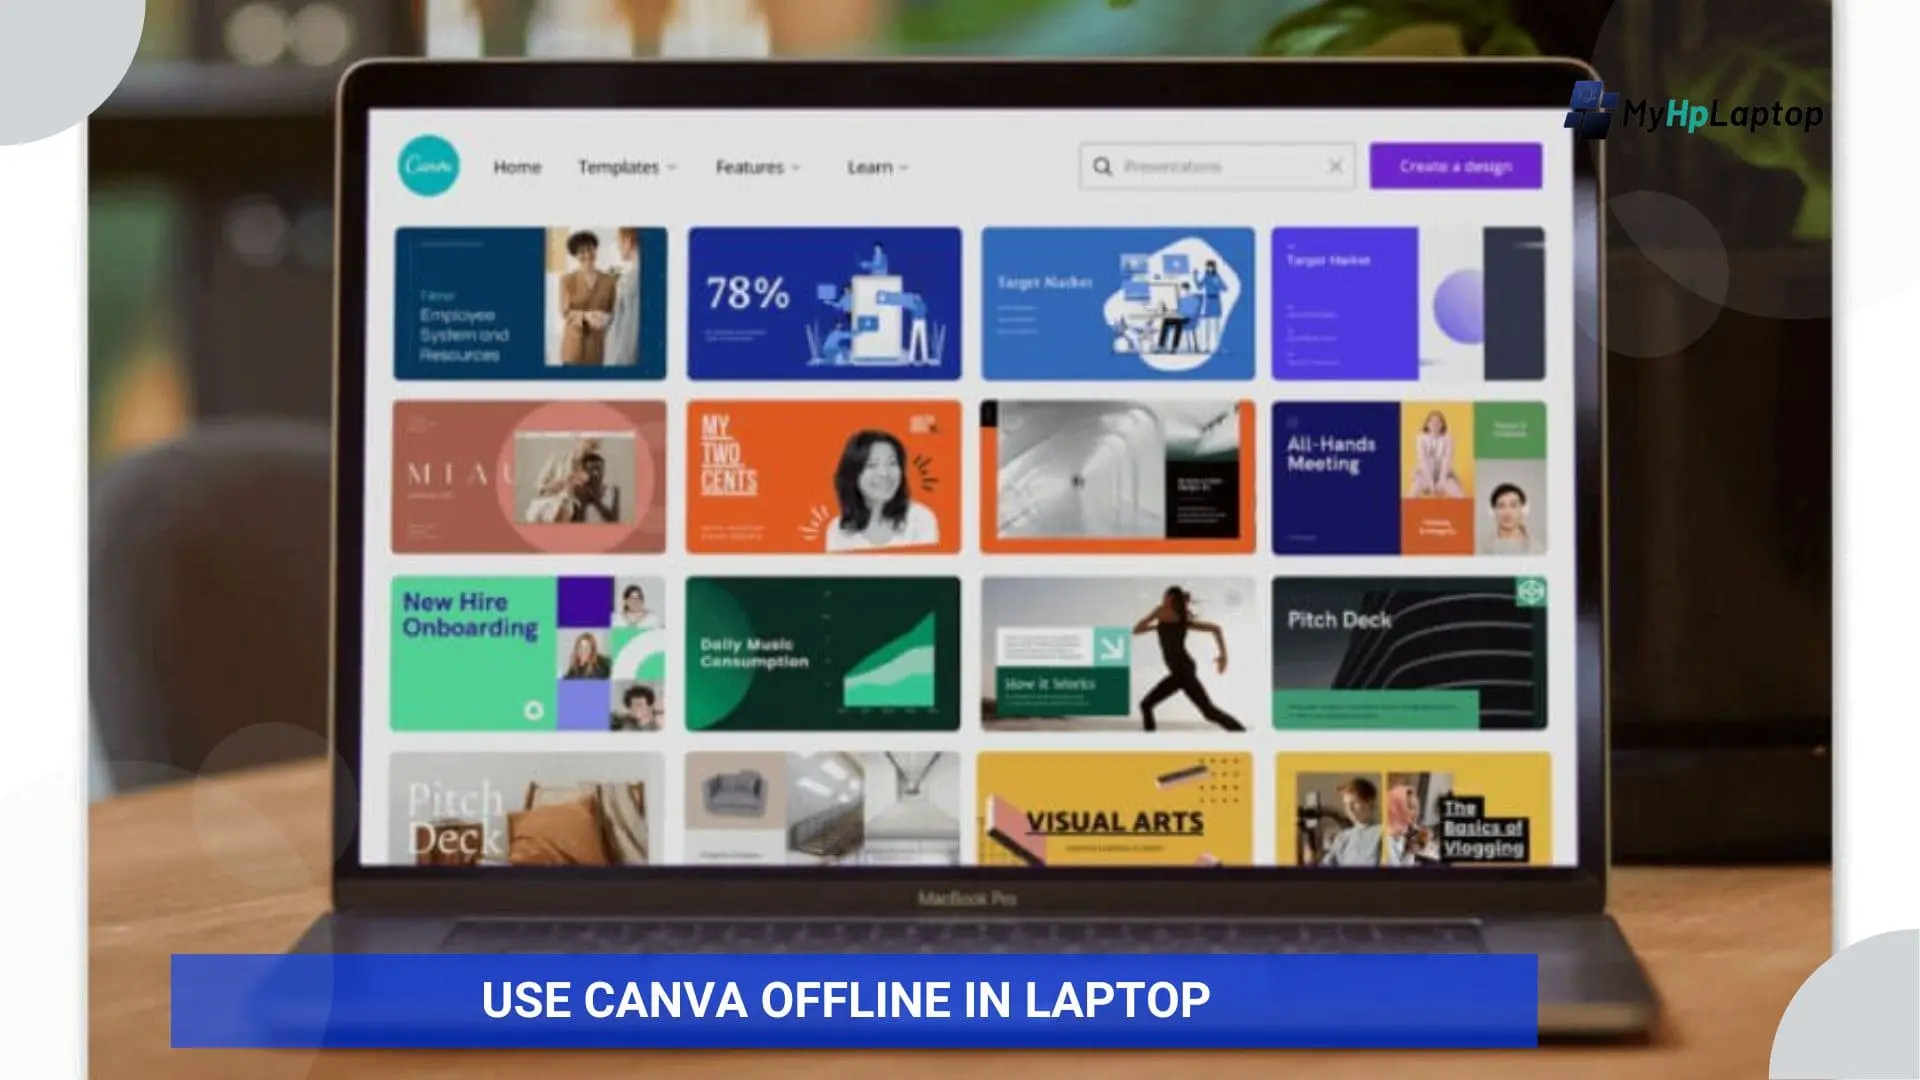 Use Canva offline in Laptop